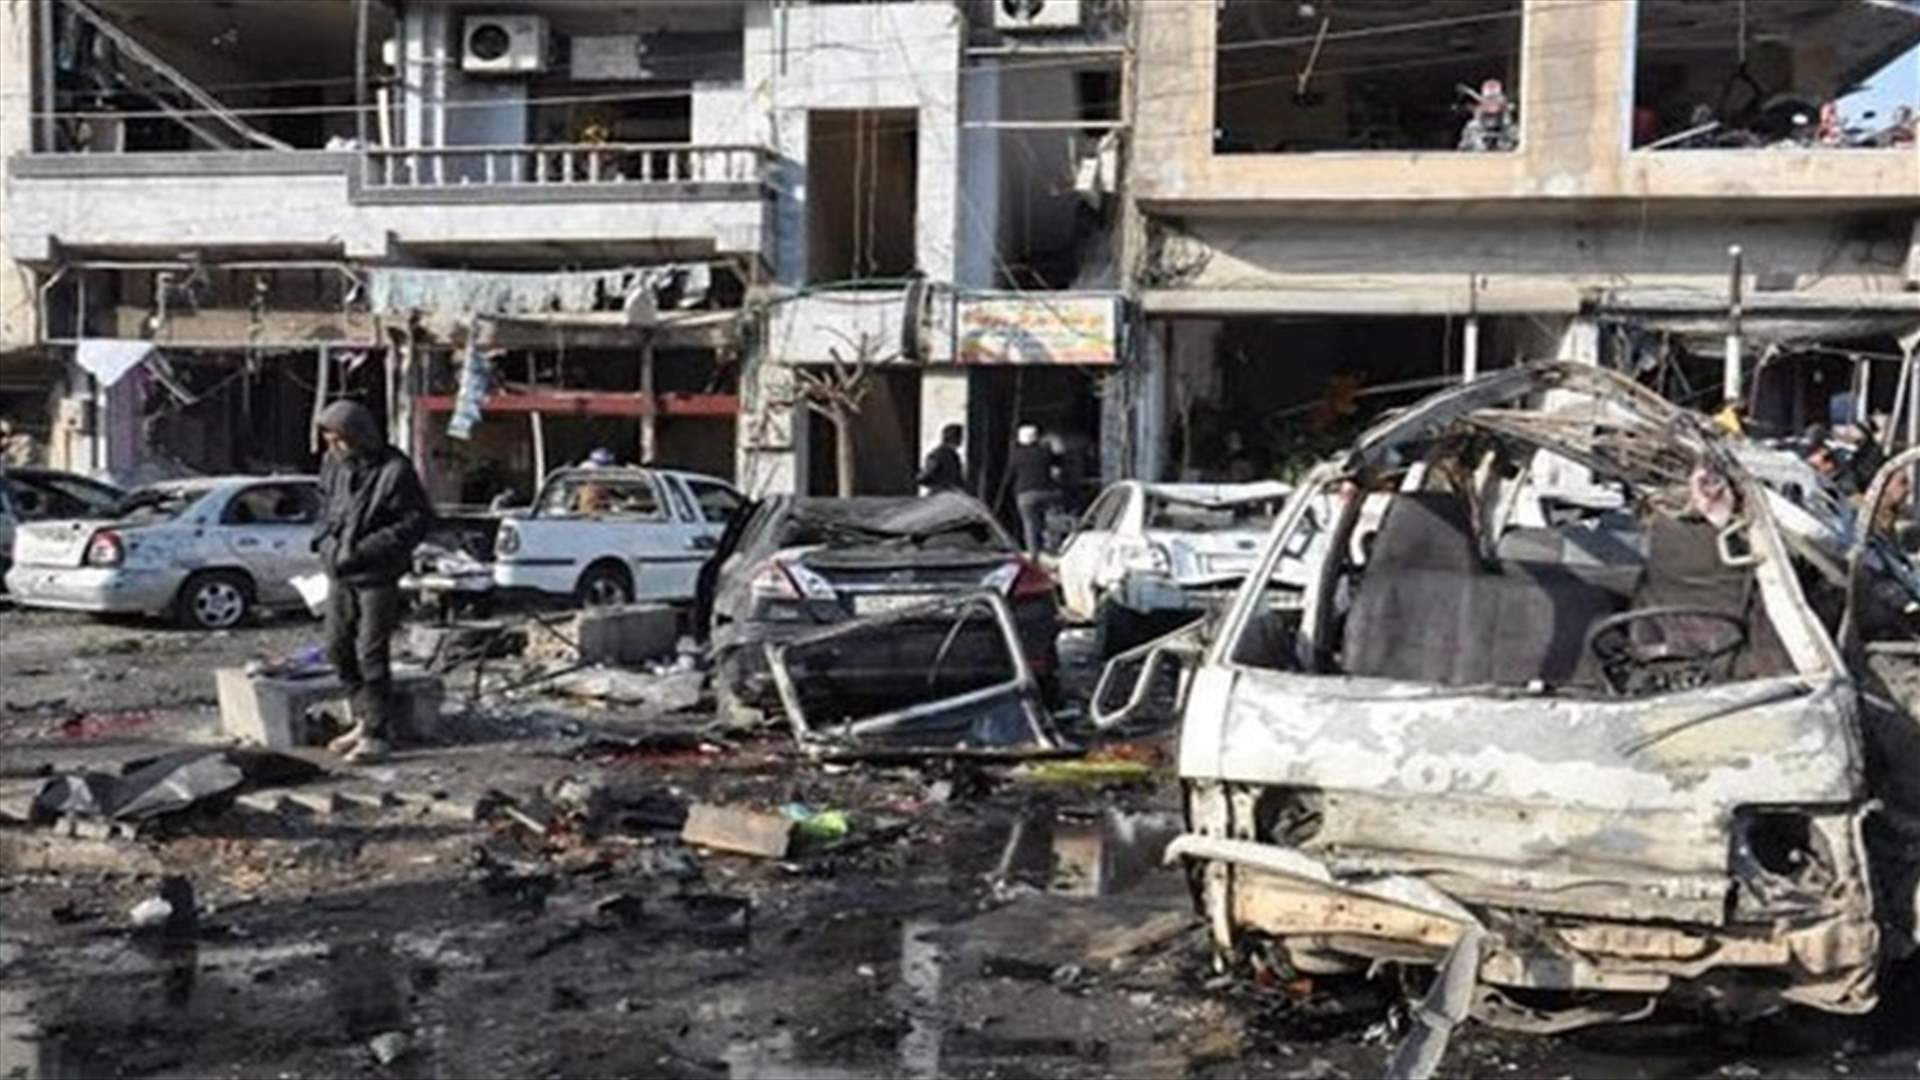 Double bomb attack kills 22 in Homs - state TV